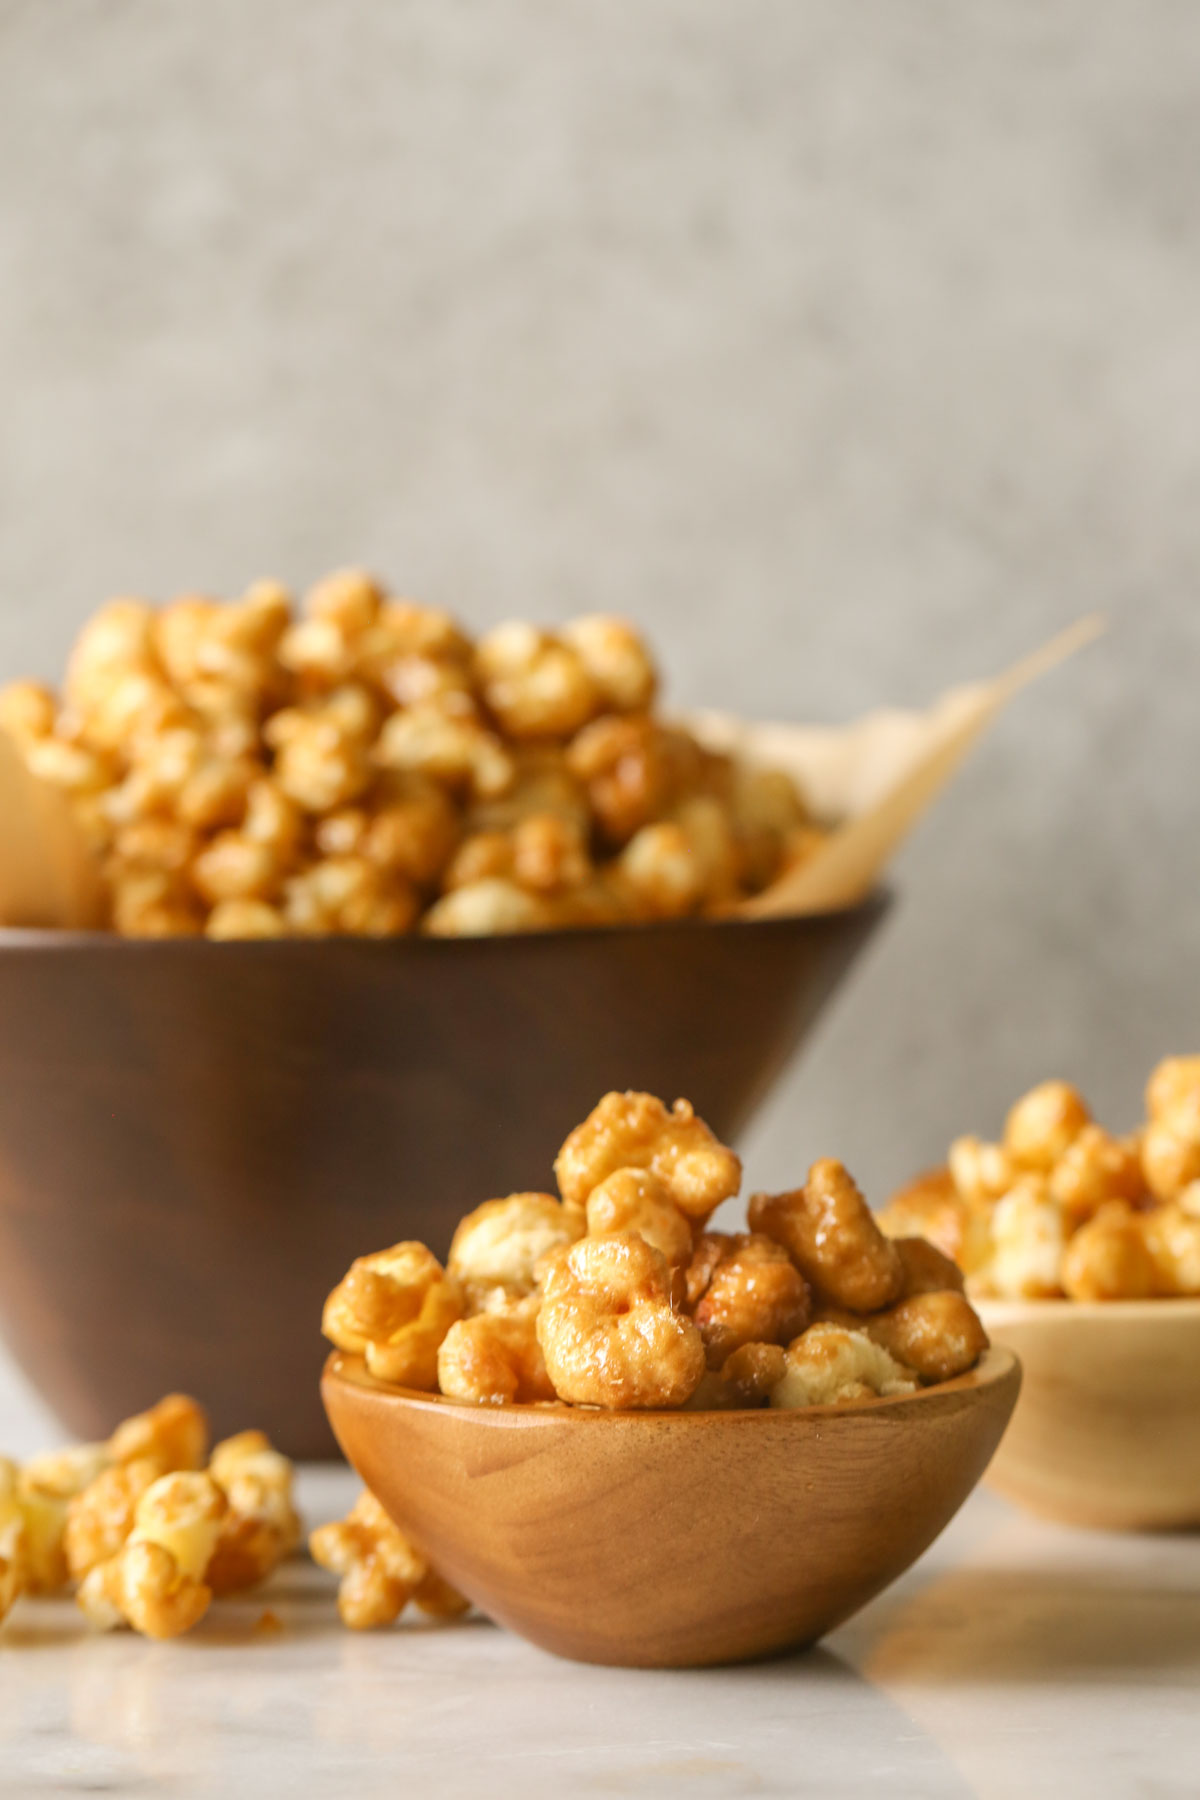 A small wood bowl of Caramel Puff Corn, with another small bowl and a large wood bowl of Caramel Puff Corn in the background.  